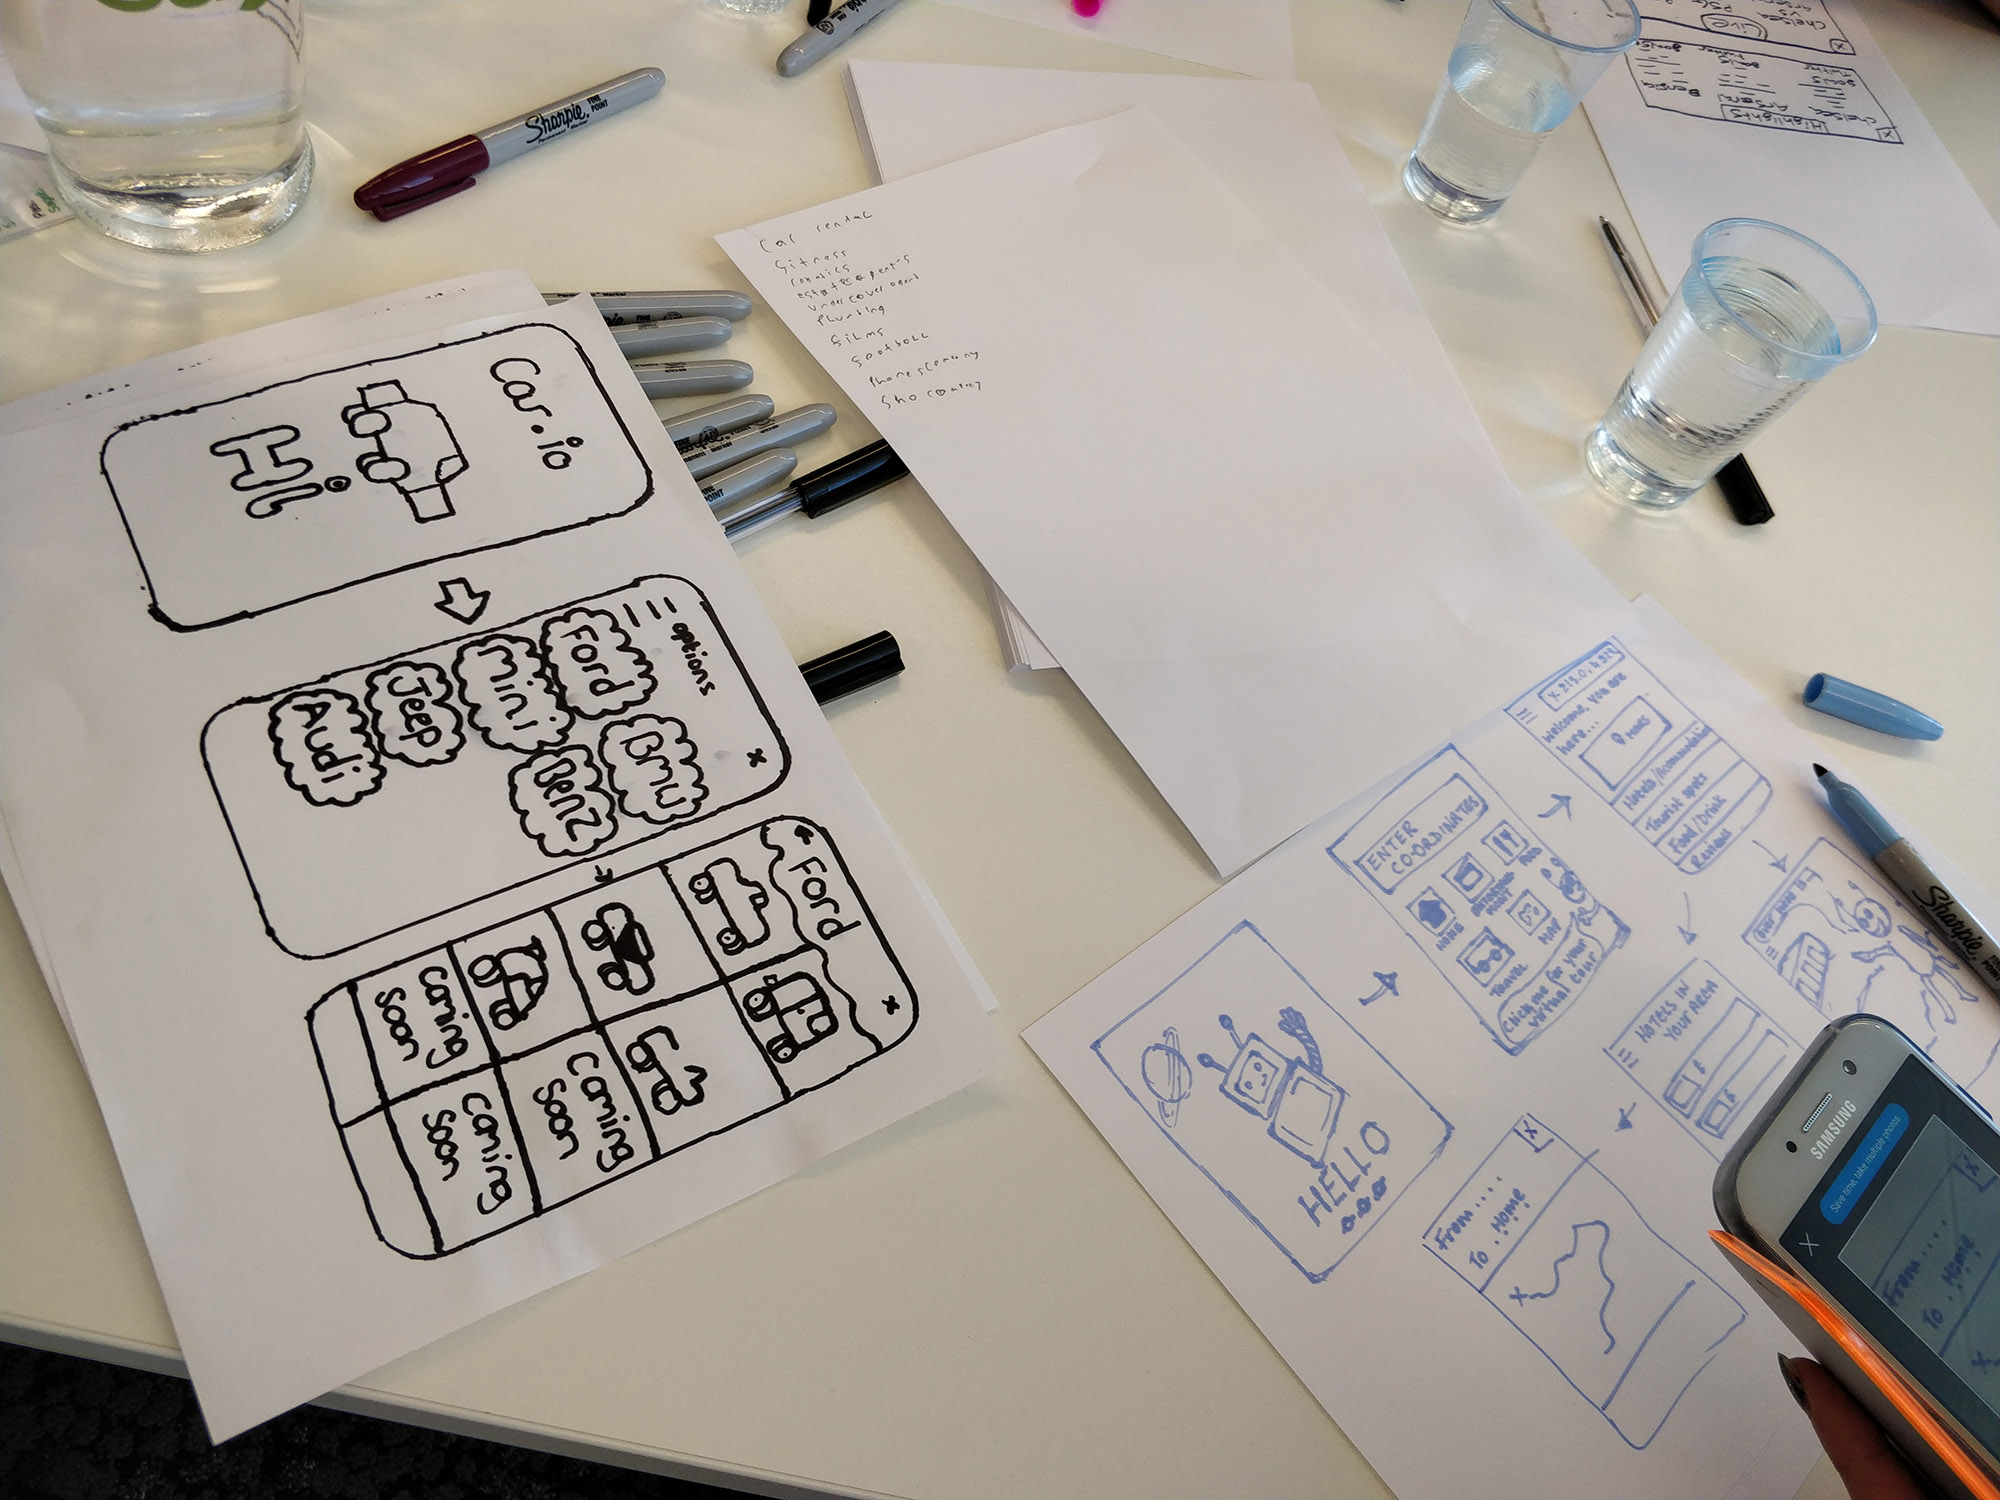 Paper sketches of mobile app ideas